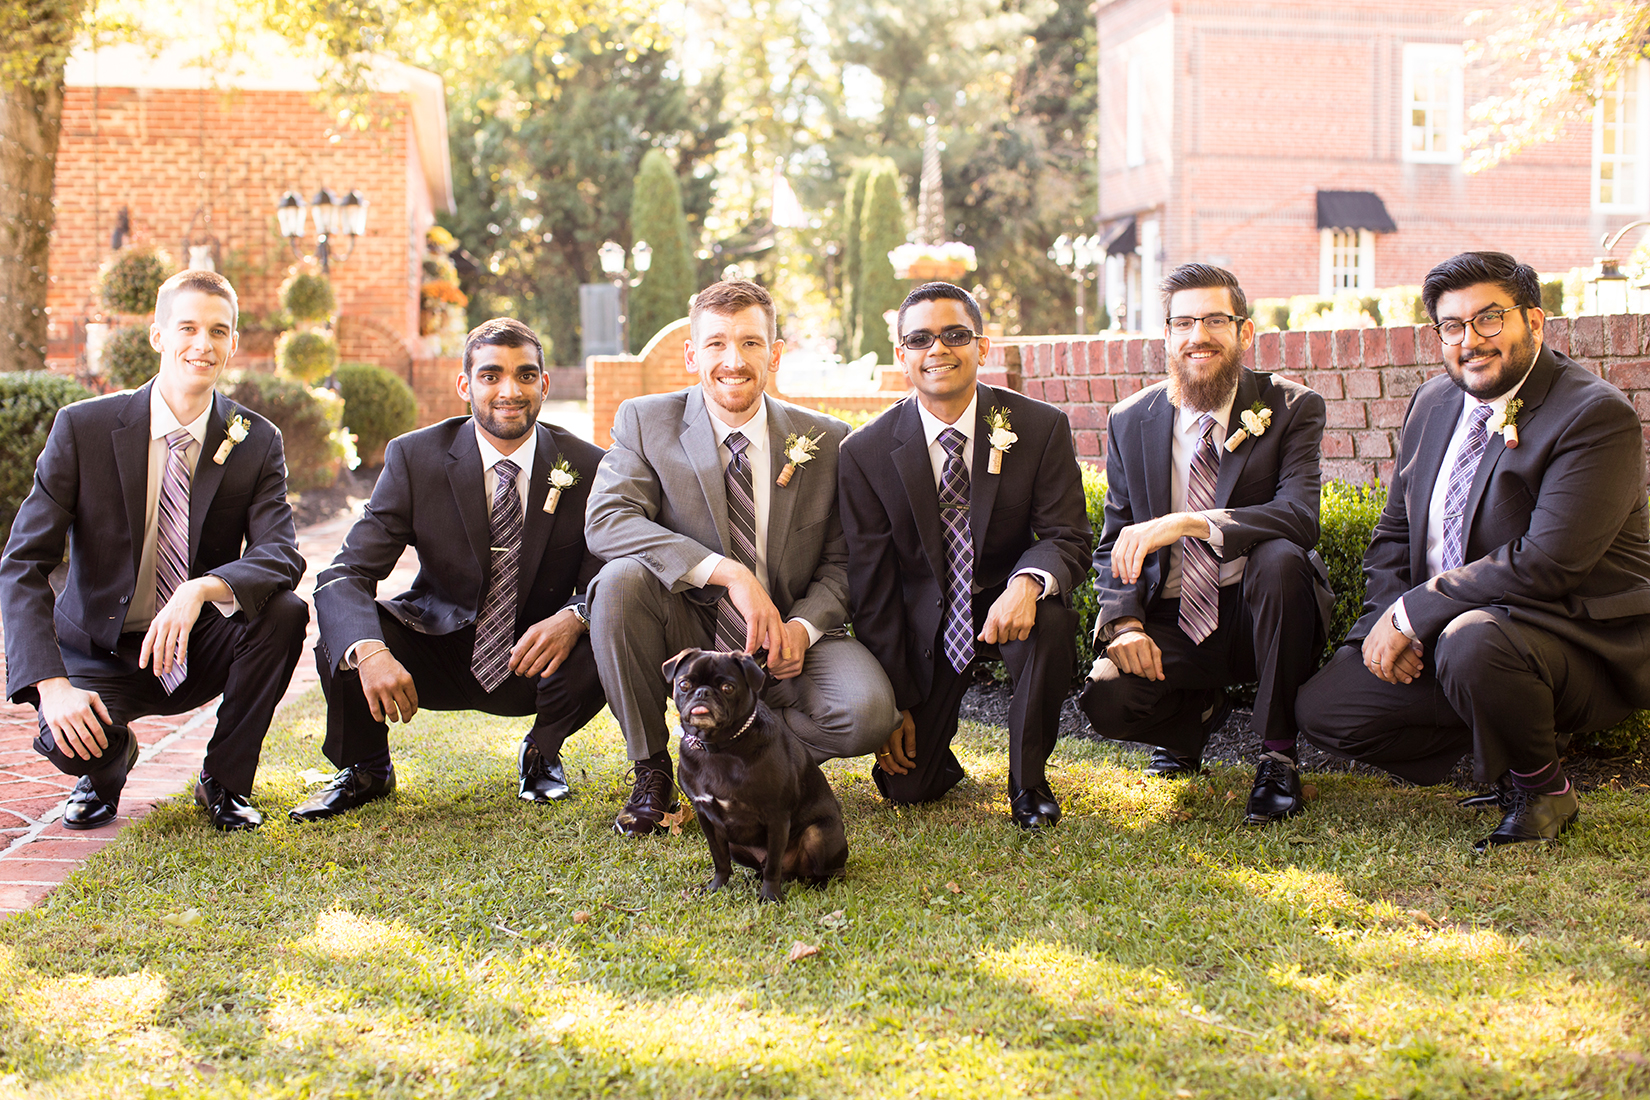 How to Incorporate Your Dog in Your Wedding - Image Property of www.j-dphoto.com